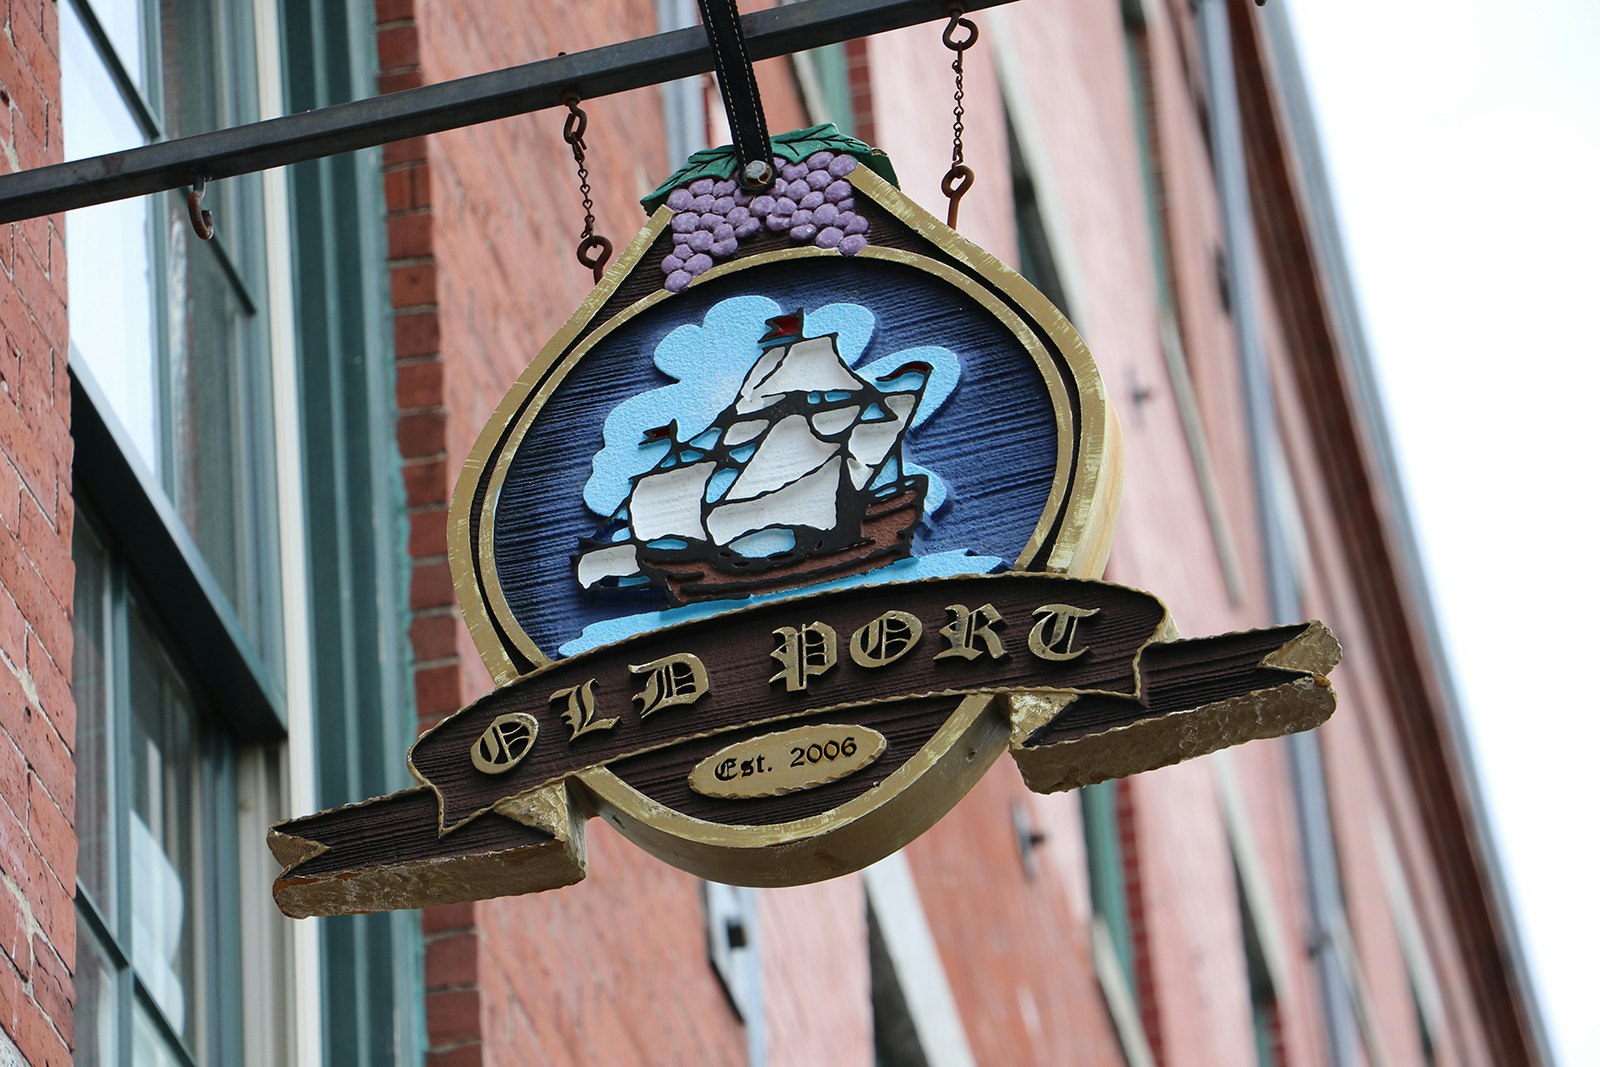 Sign for Old Port Brewing in Portland, Maine